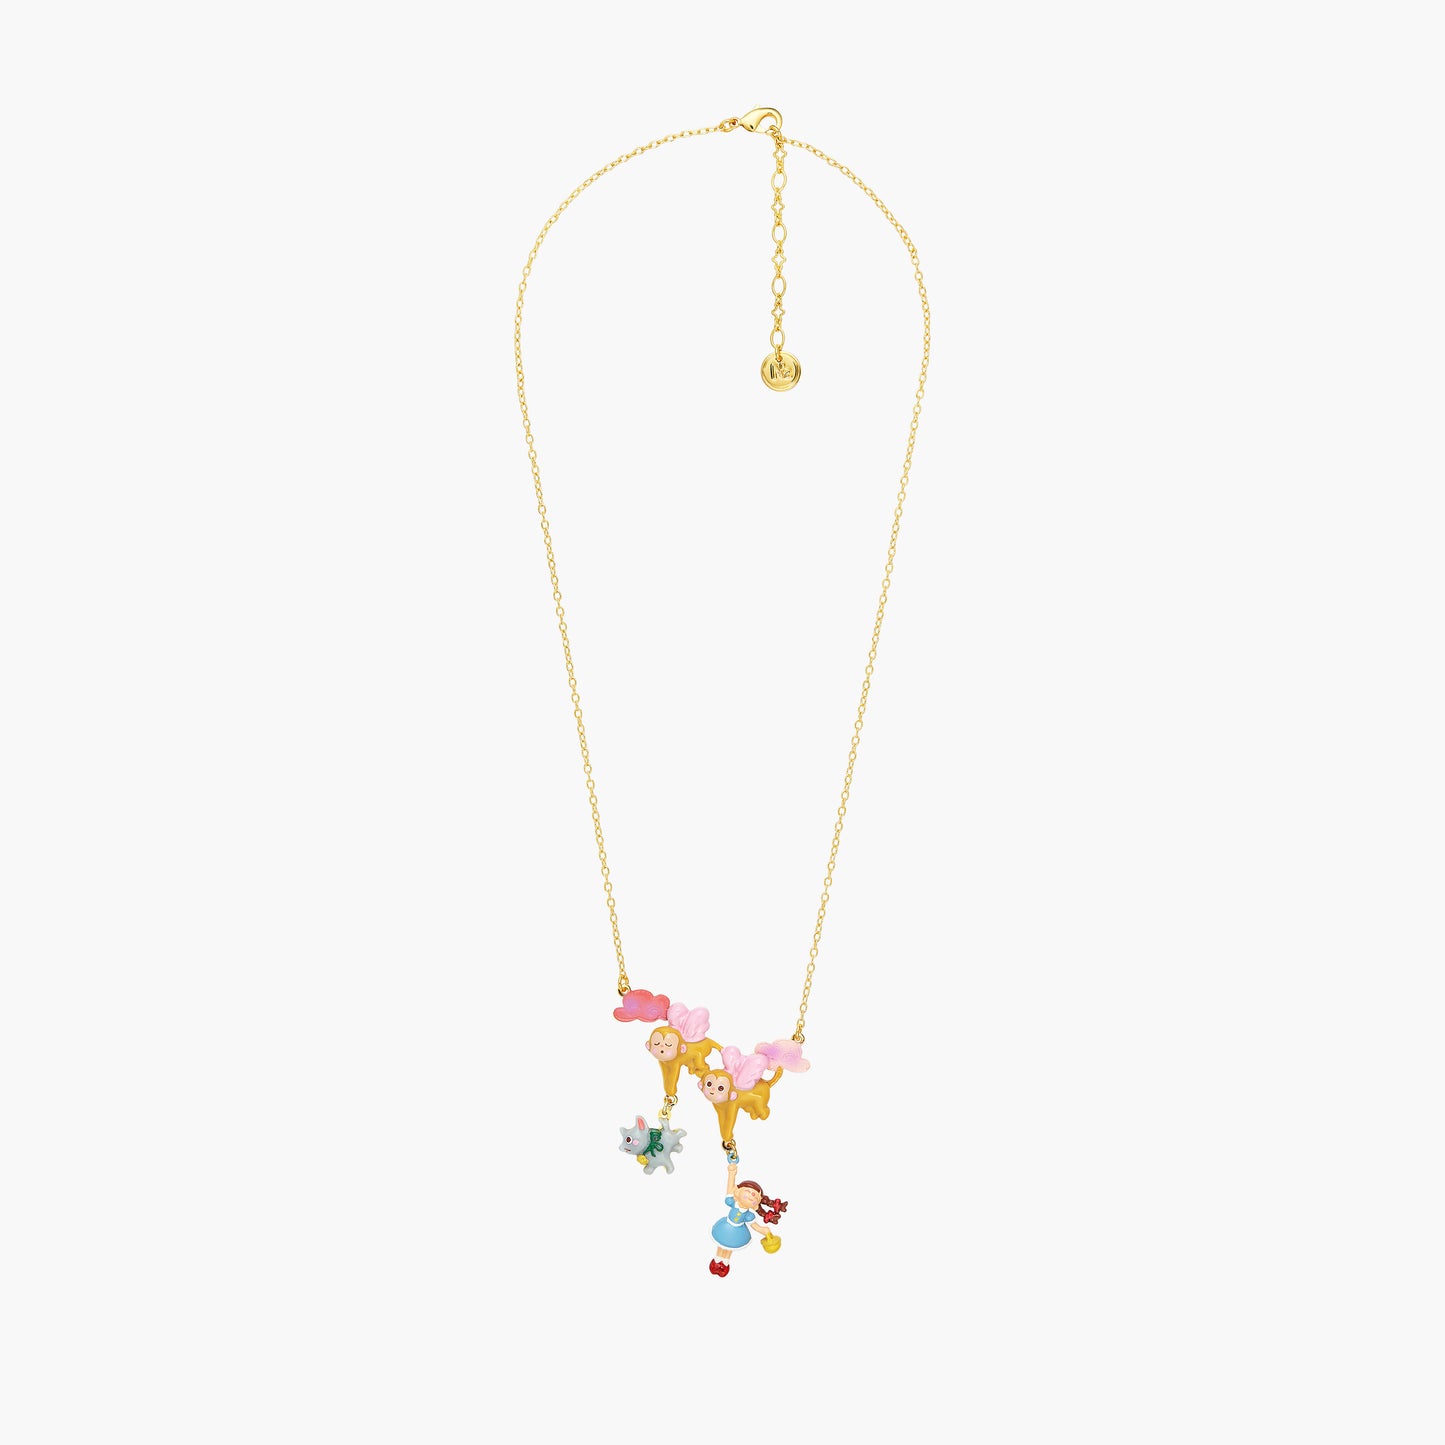 Theé Toto & Dorothy Dorothy, Toto Theé Dog And Theé Winged Monkey Statement Necklace | ANOZ3081